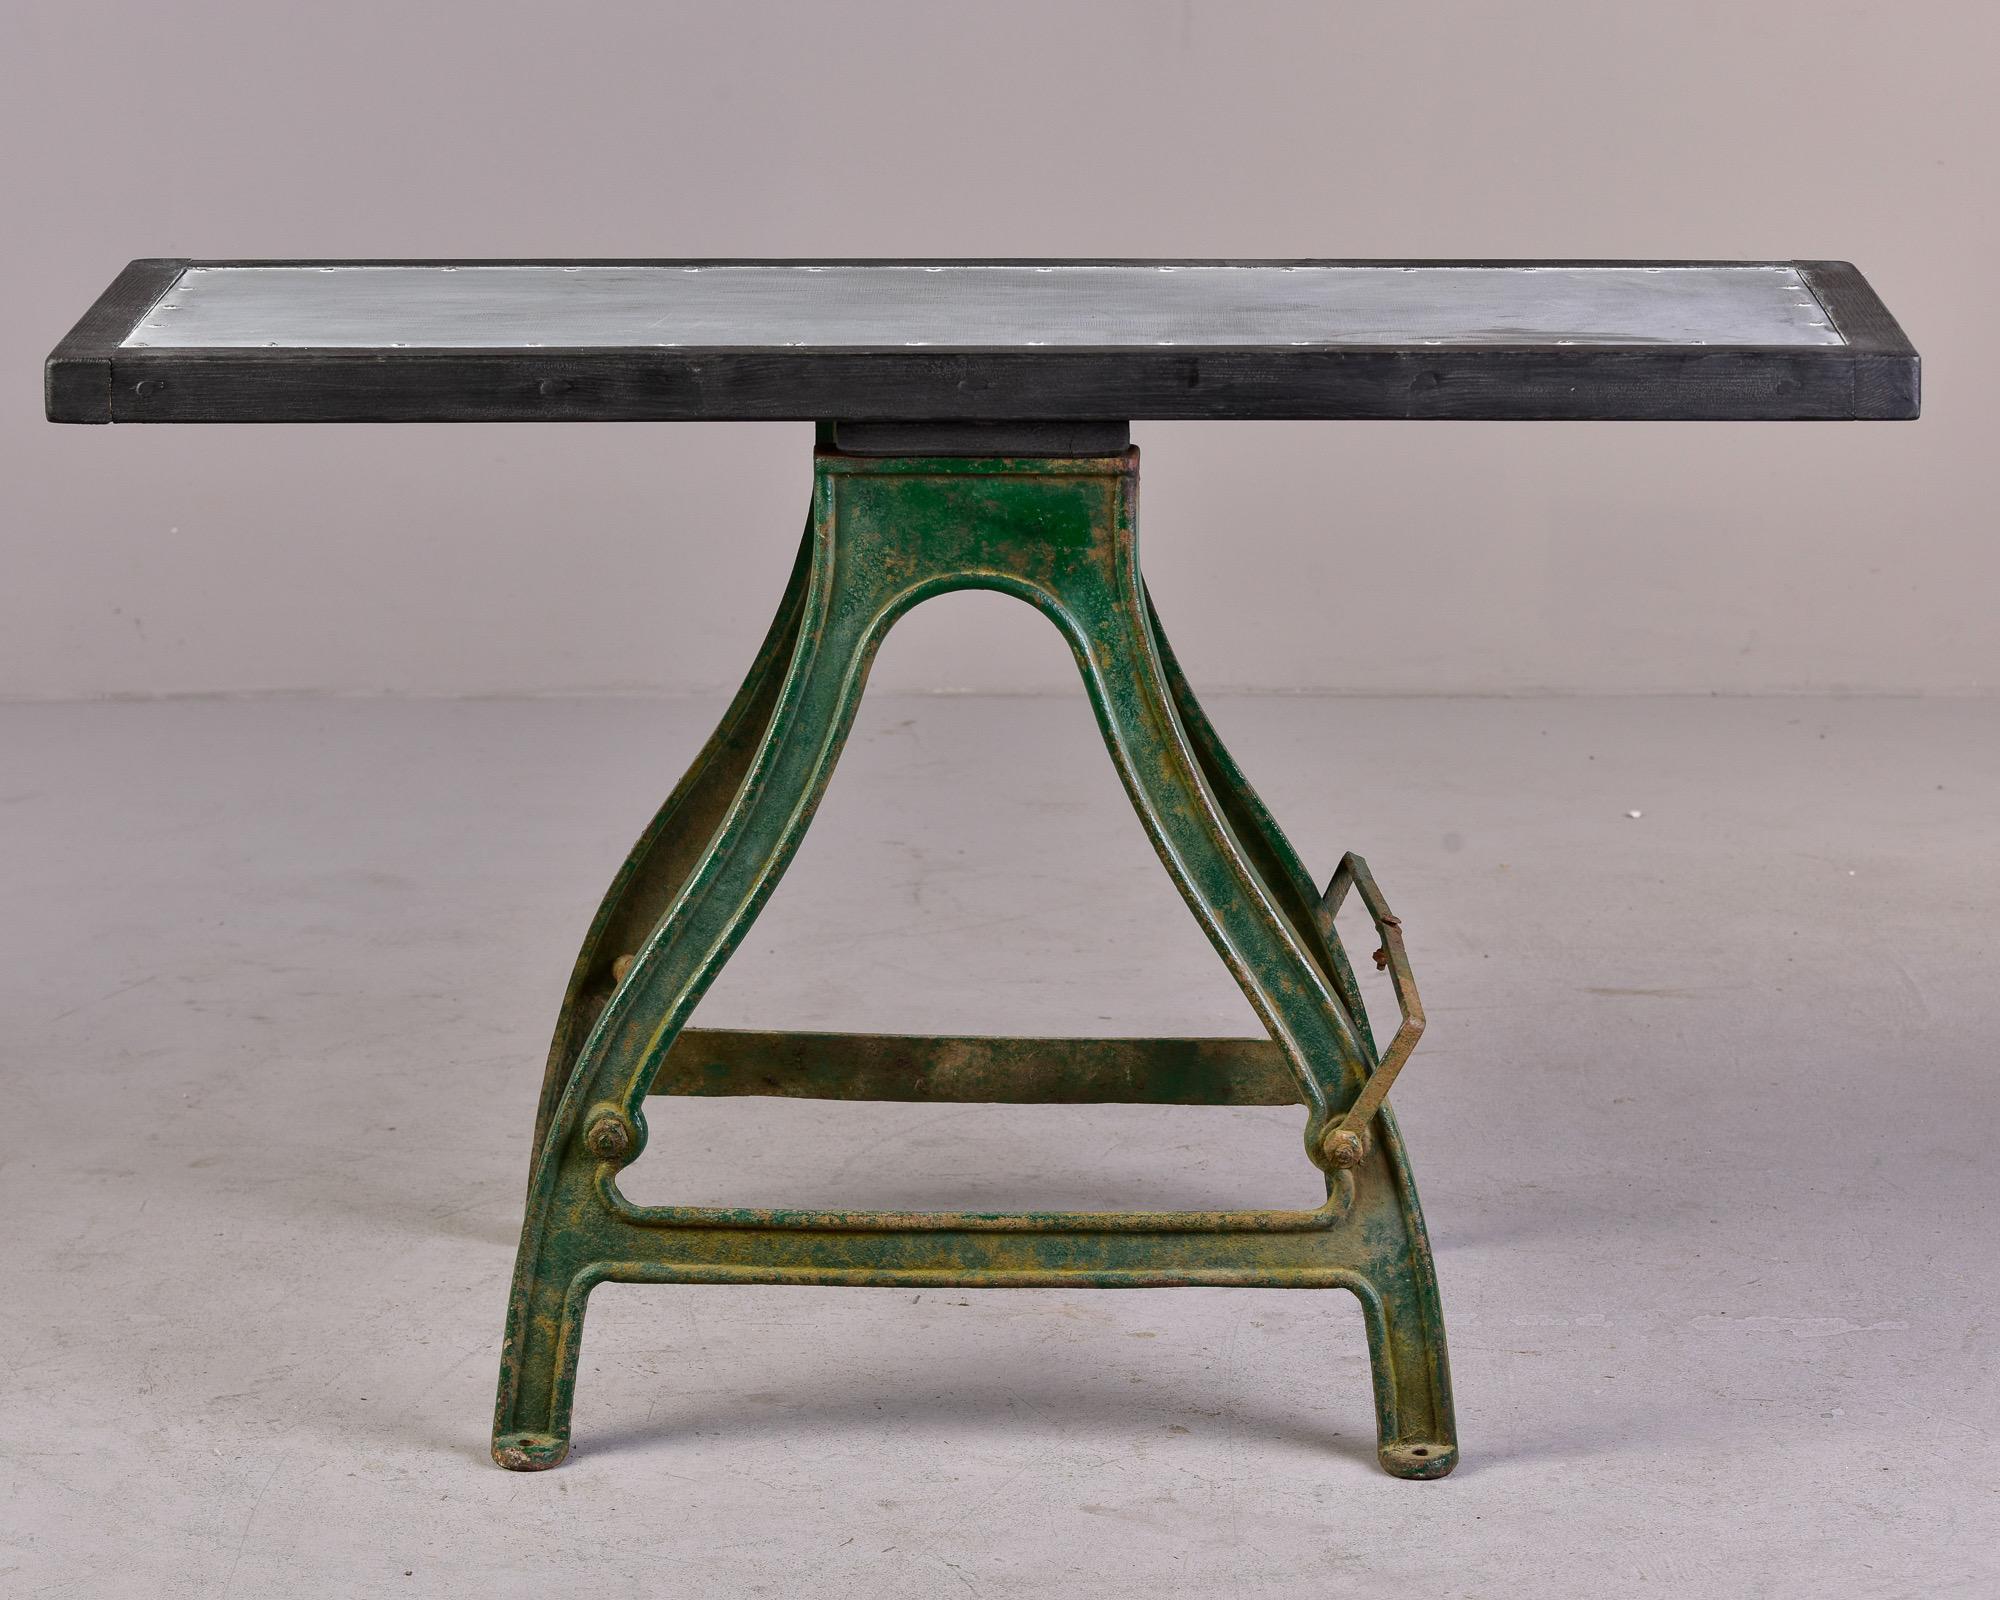 Found in England, this circa 1880s industrial work table has a heavy iron base with original green paint that shows some rust and patina. New wood, zinc-covered table top make this a unique console or functional narrow dining/breakfast table or